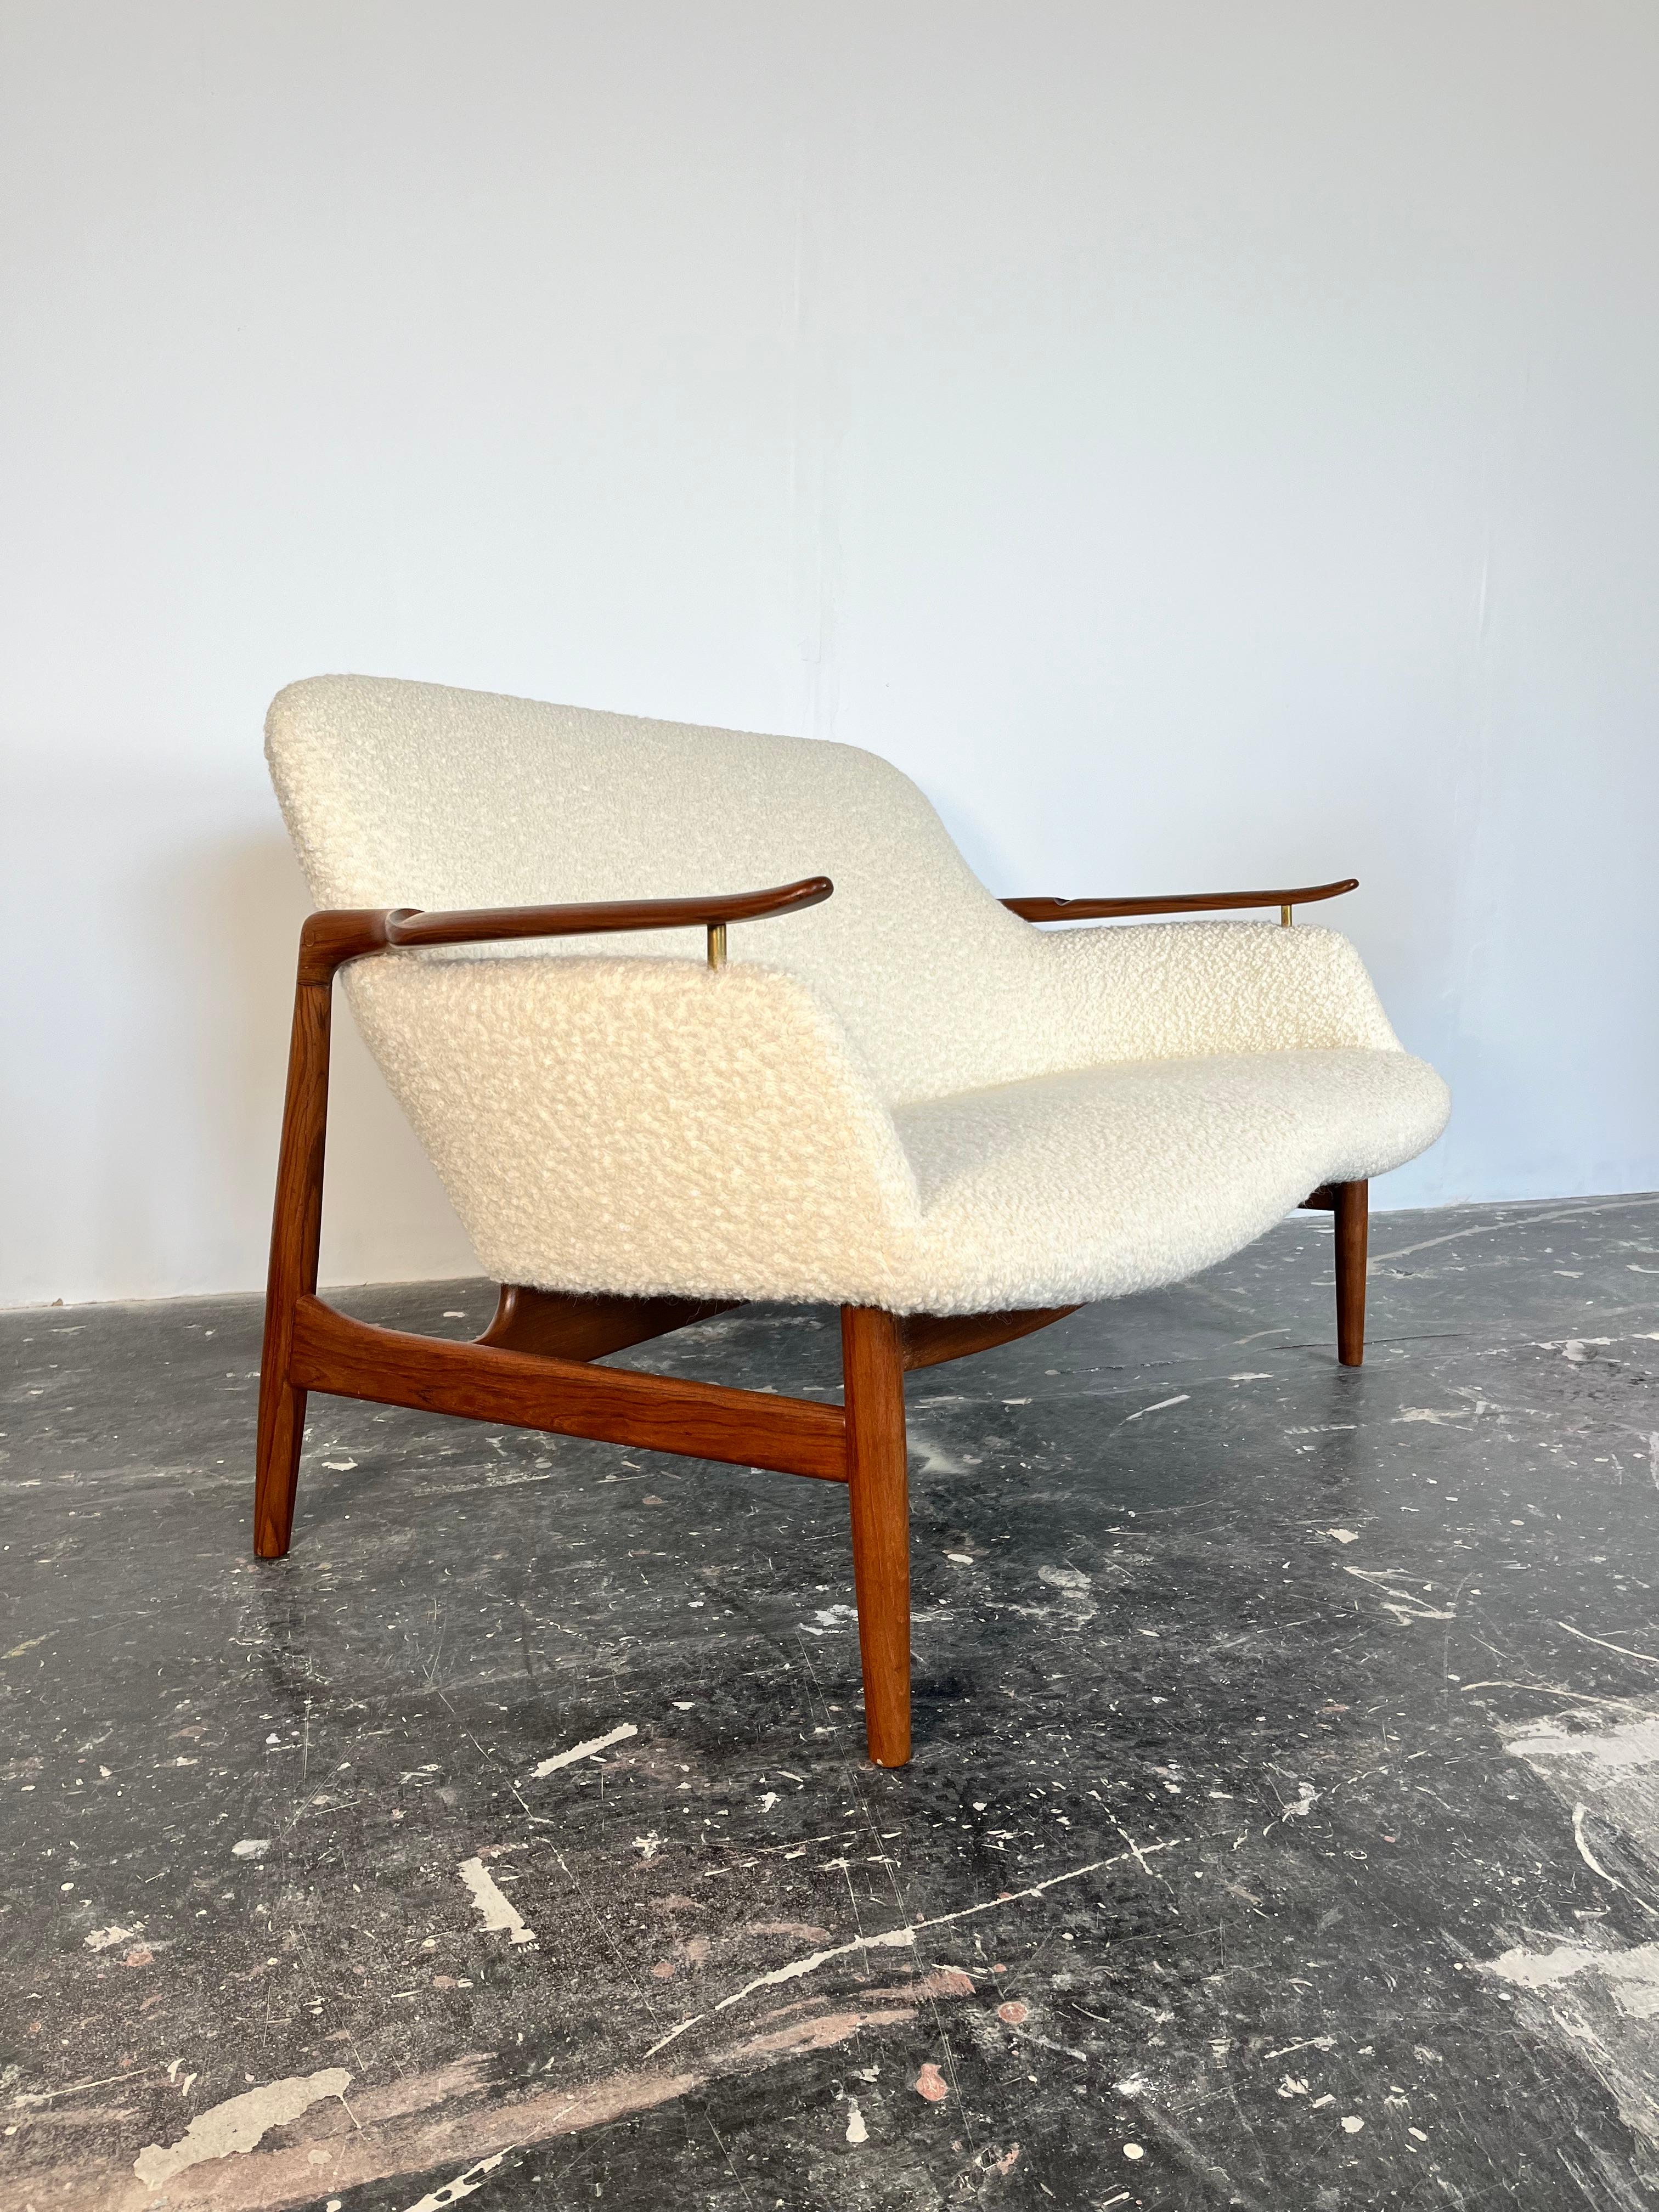 A rare example of the stunning, sculptural settee by Danish design pioneer Finn Juhl. The NV-53 is named after its cabinetmaker, Niels Vodder, and the year of its design, 1953. Its biomorphic shape—influenced by the Surrealists—and unique, floating